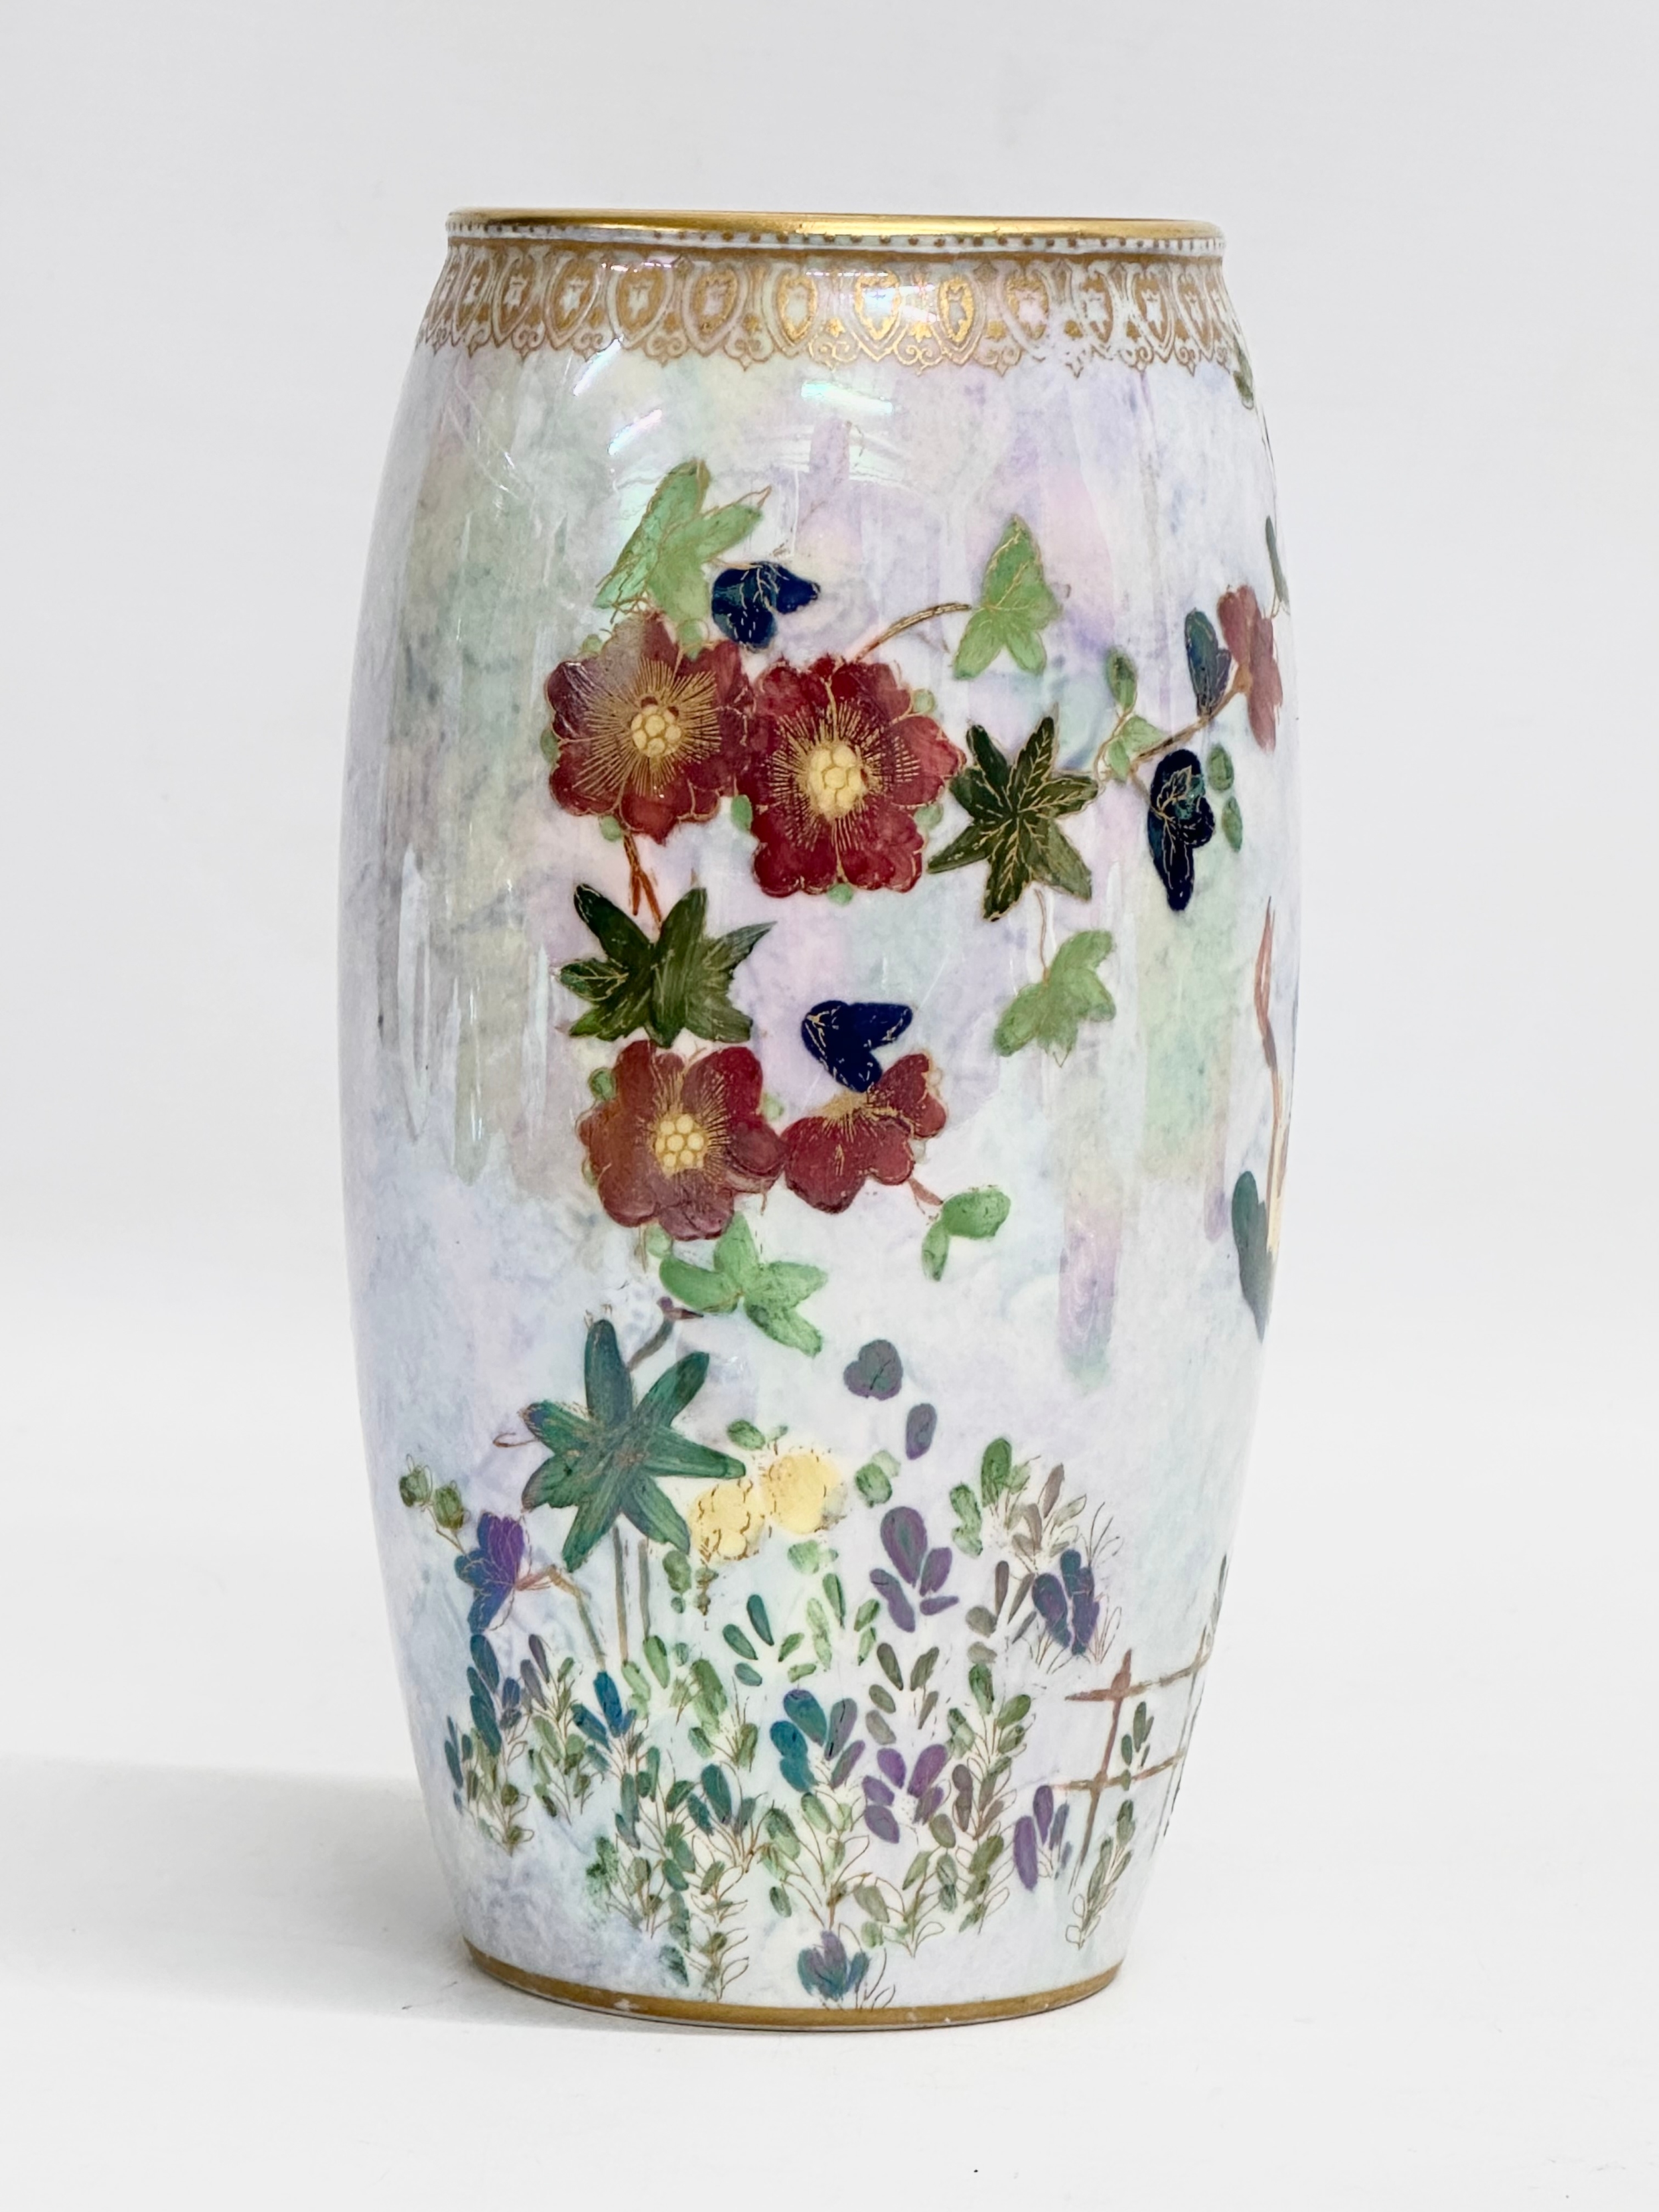 A Royal Doulton lustre vase designed by Herbert Betteley. Early 20th century. 1922-1927. 18cm - Image 4 of 8